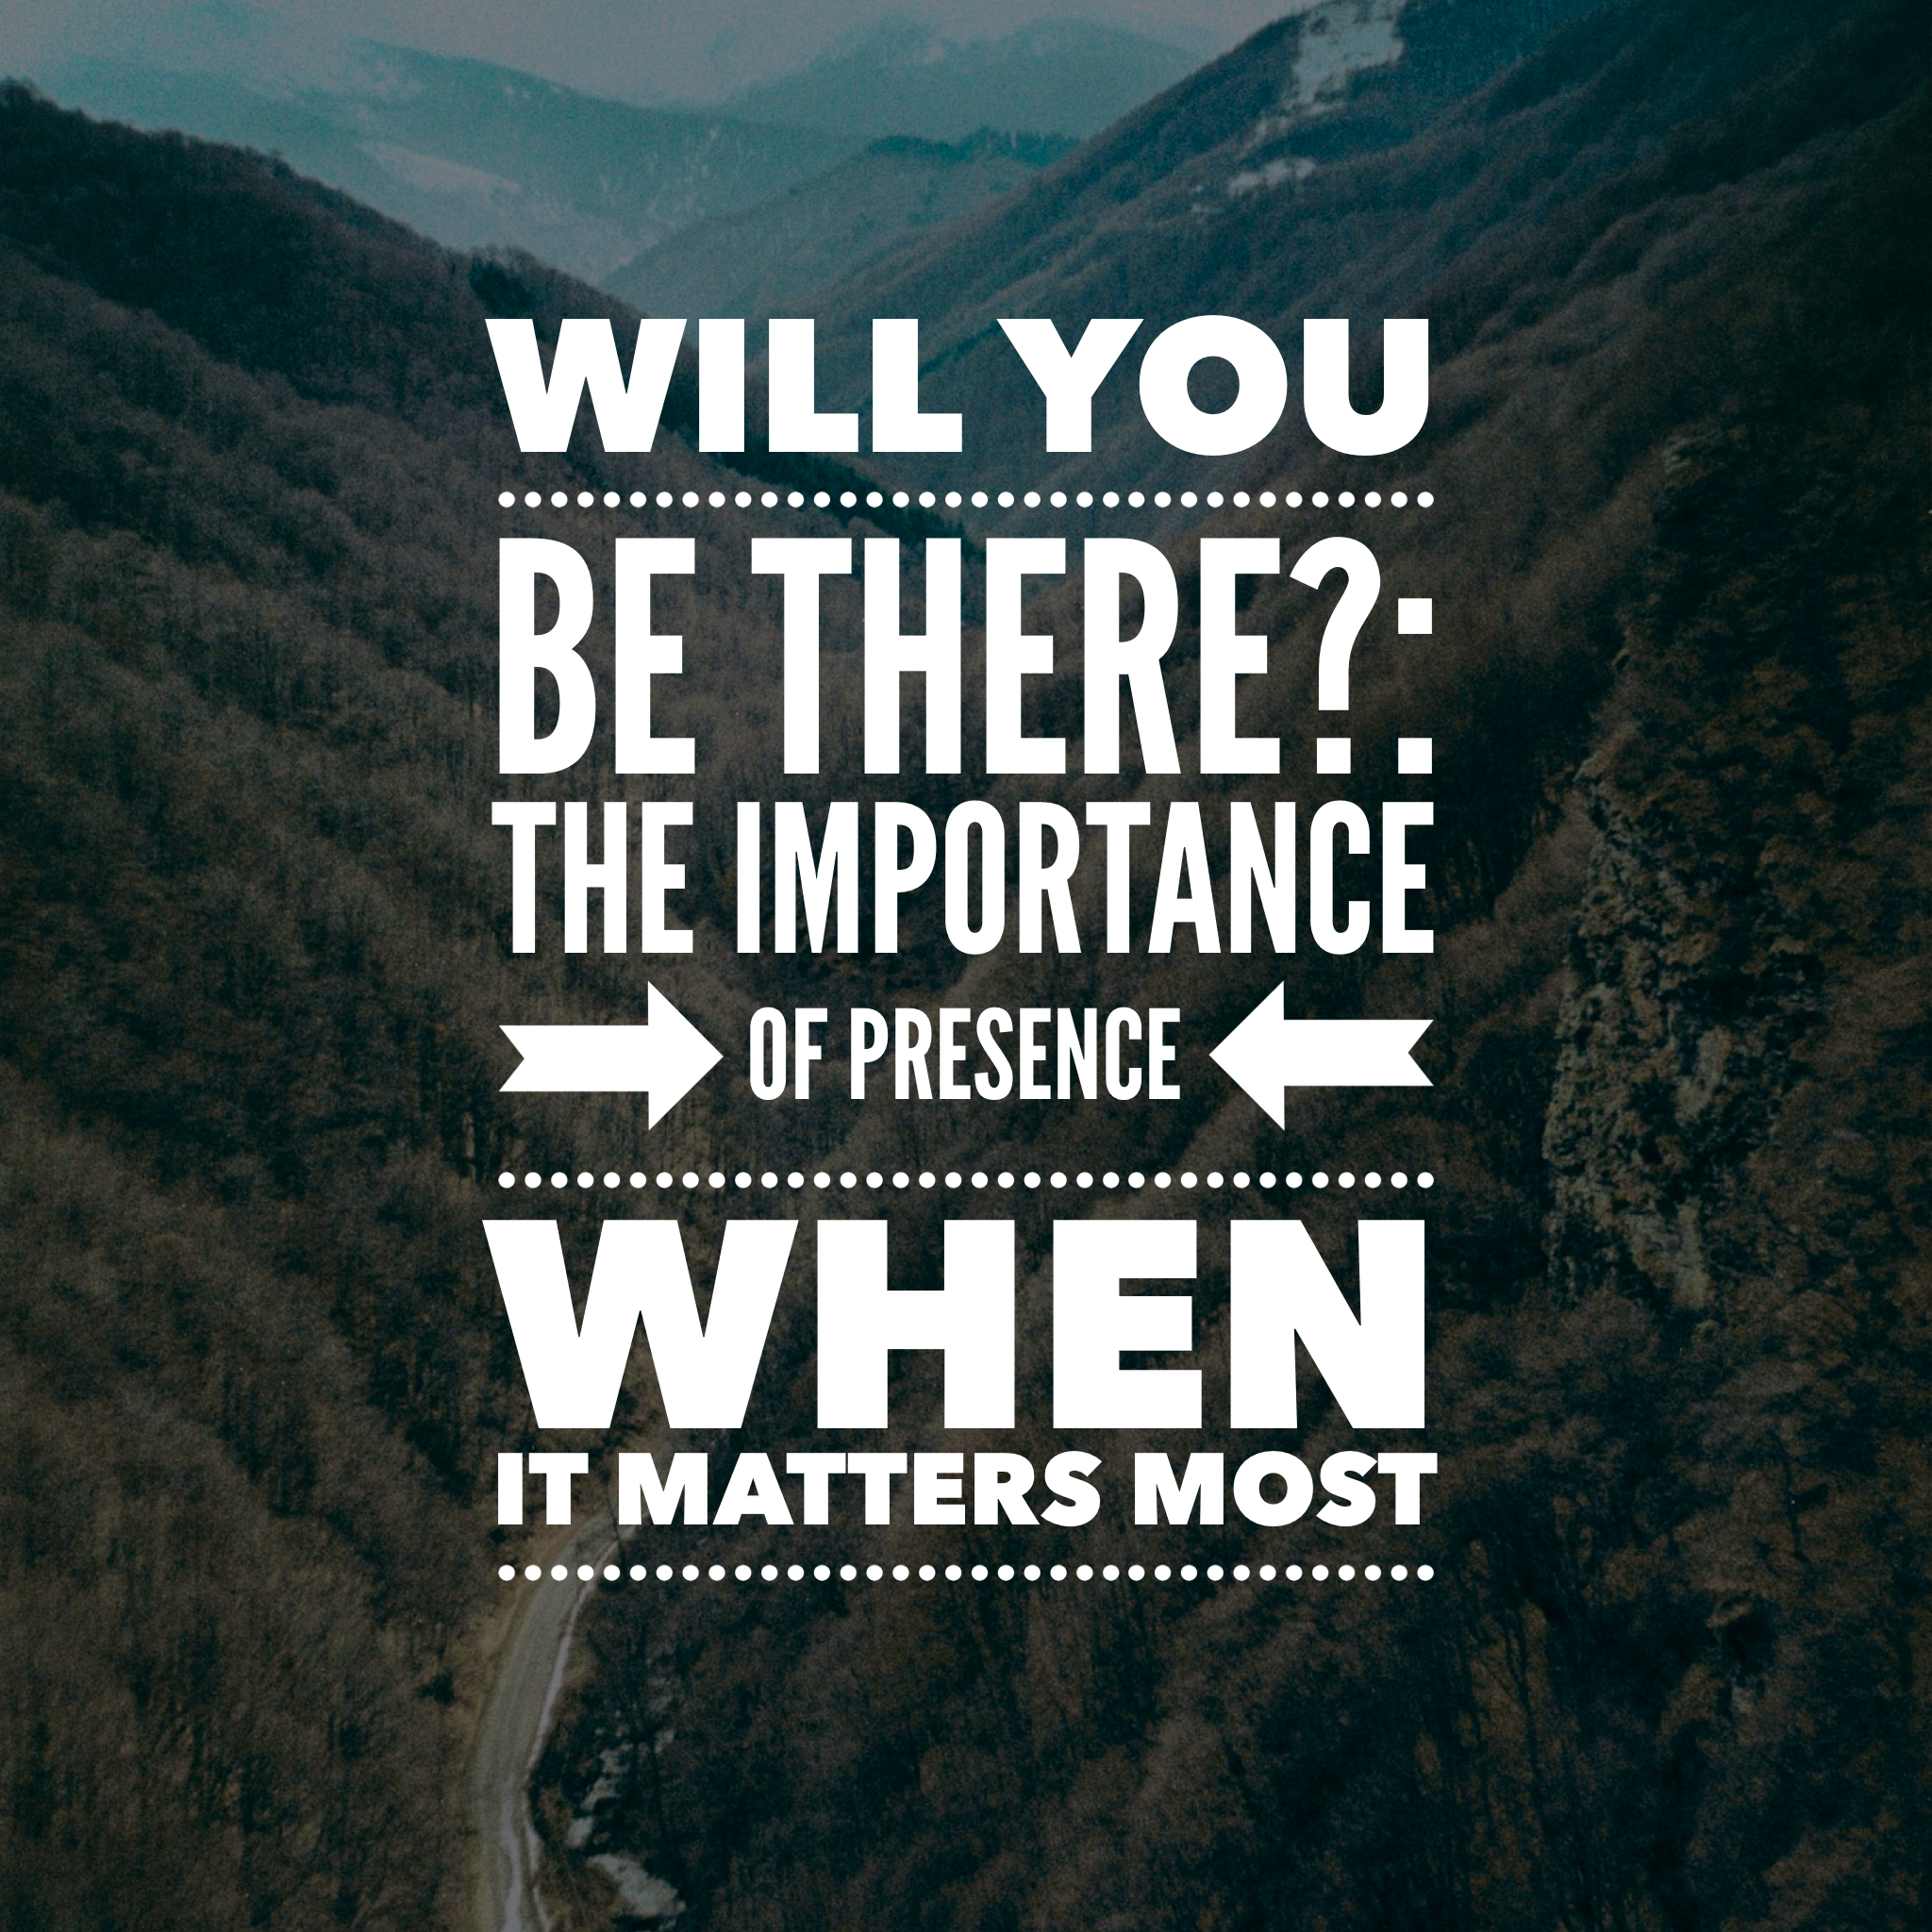 Will You Be There?: The Importance of Presence When It Matters Most